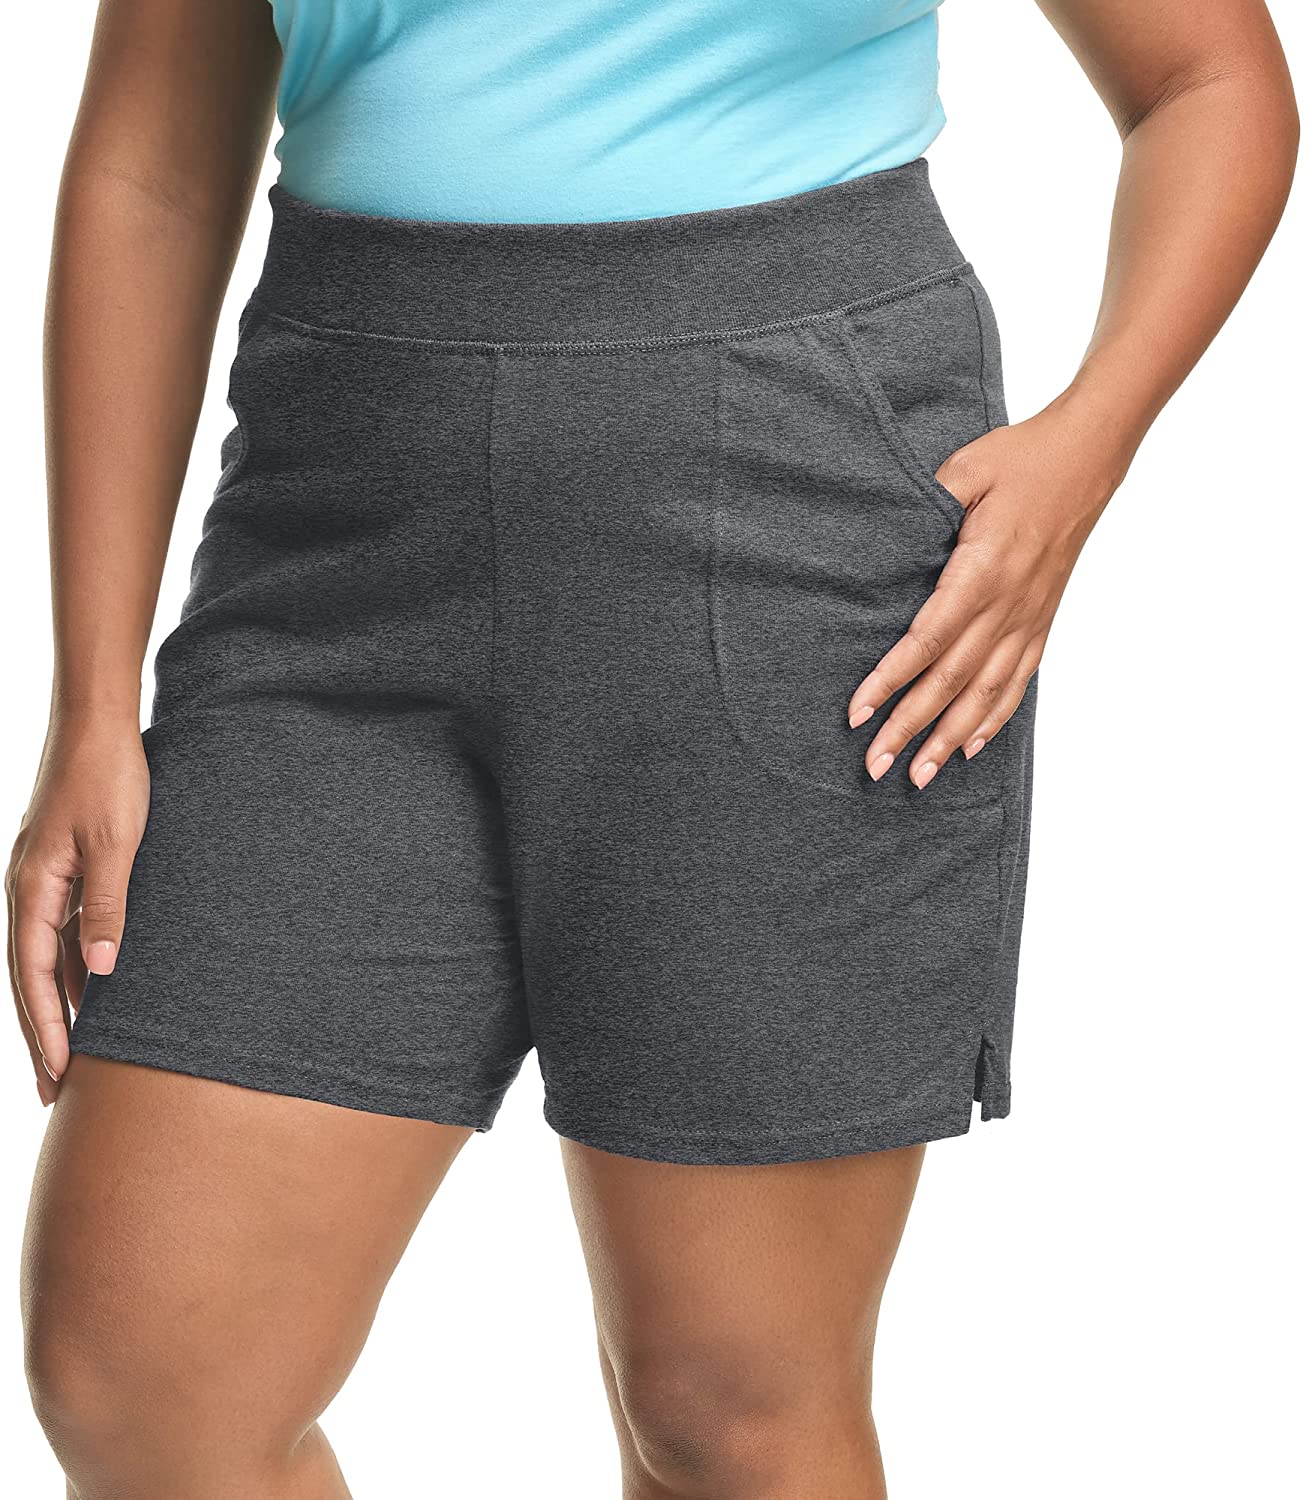 Just My Size Women's Plus Size Cotton Jersey Shorts, Pull-on Gym Shorts, 7  Inse